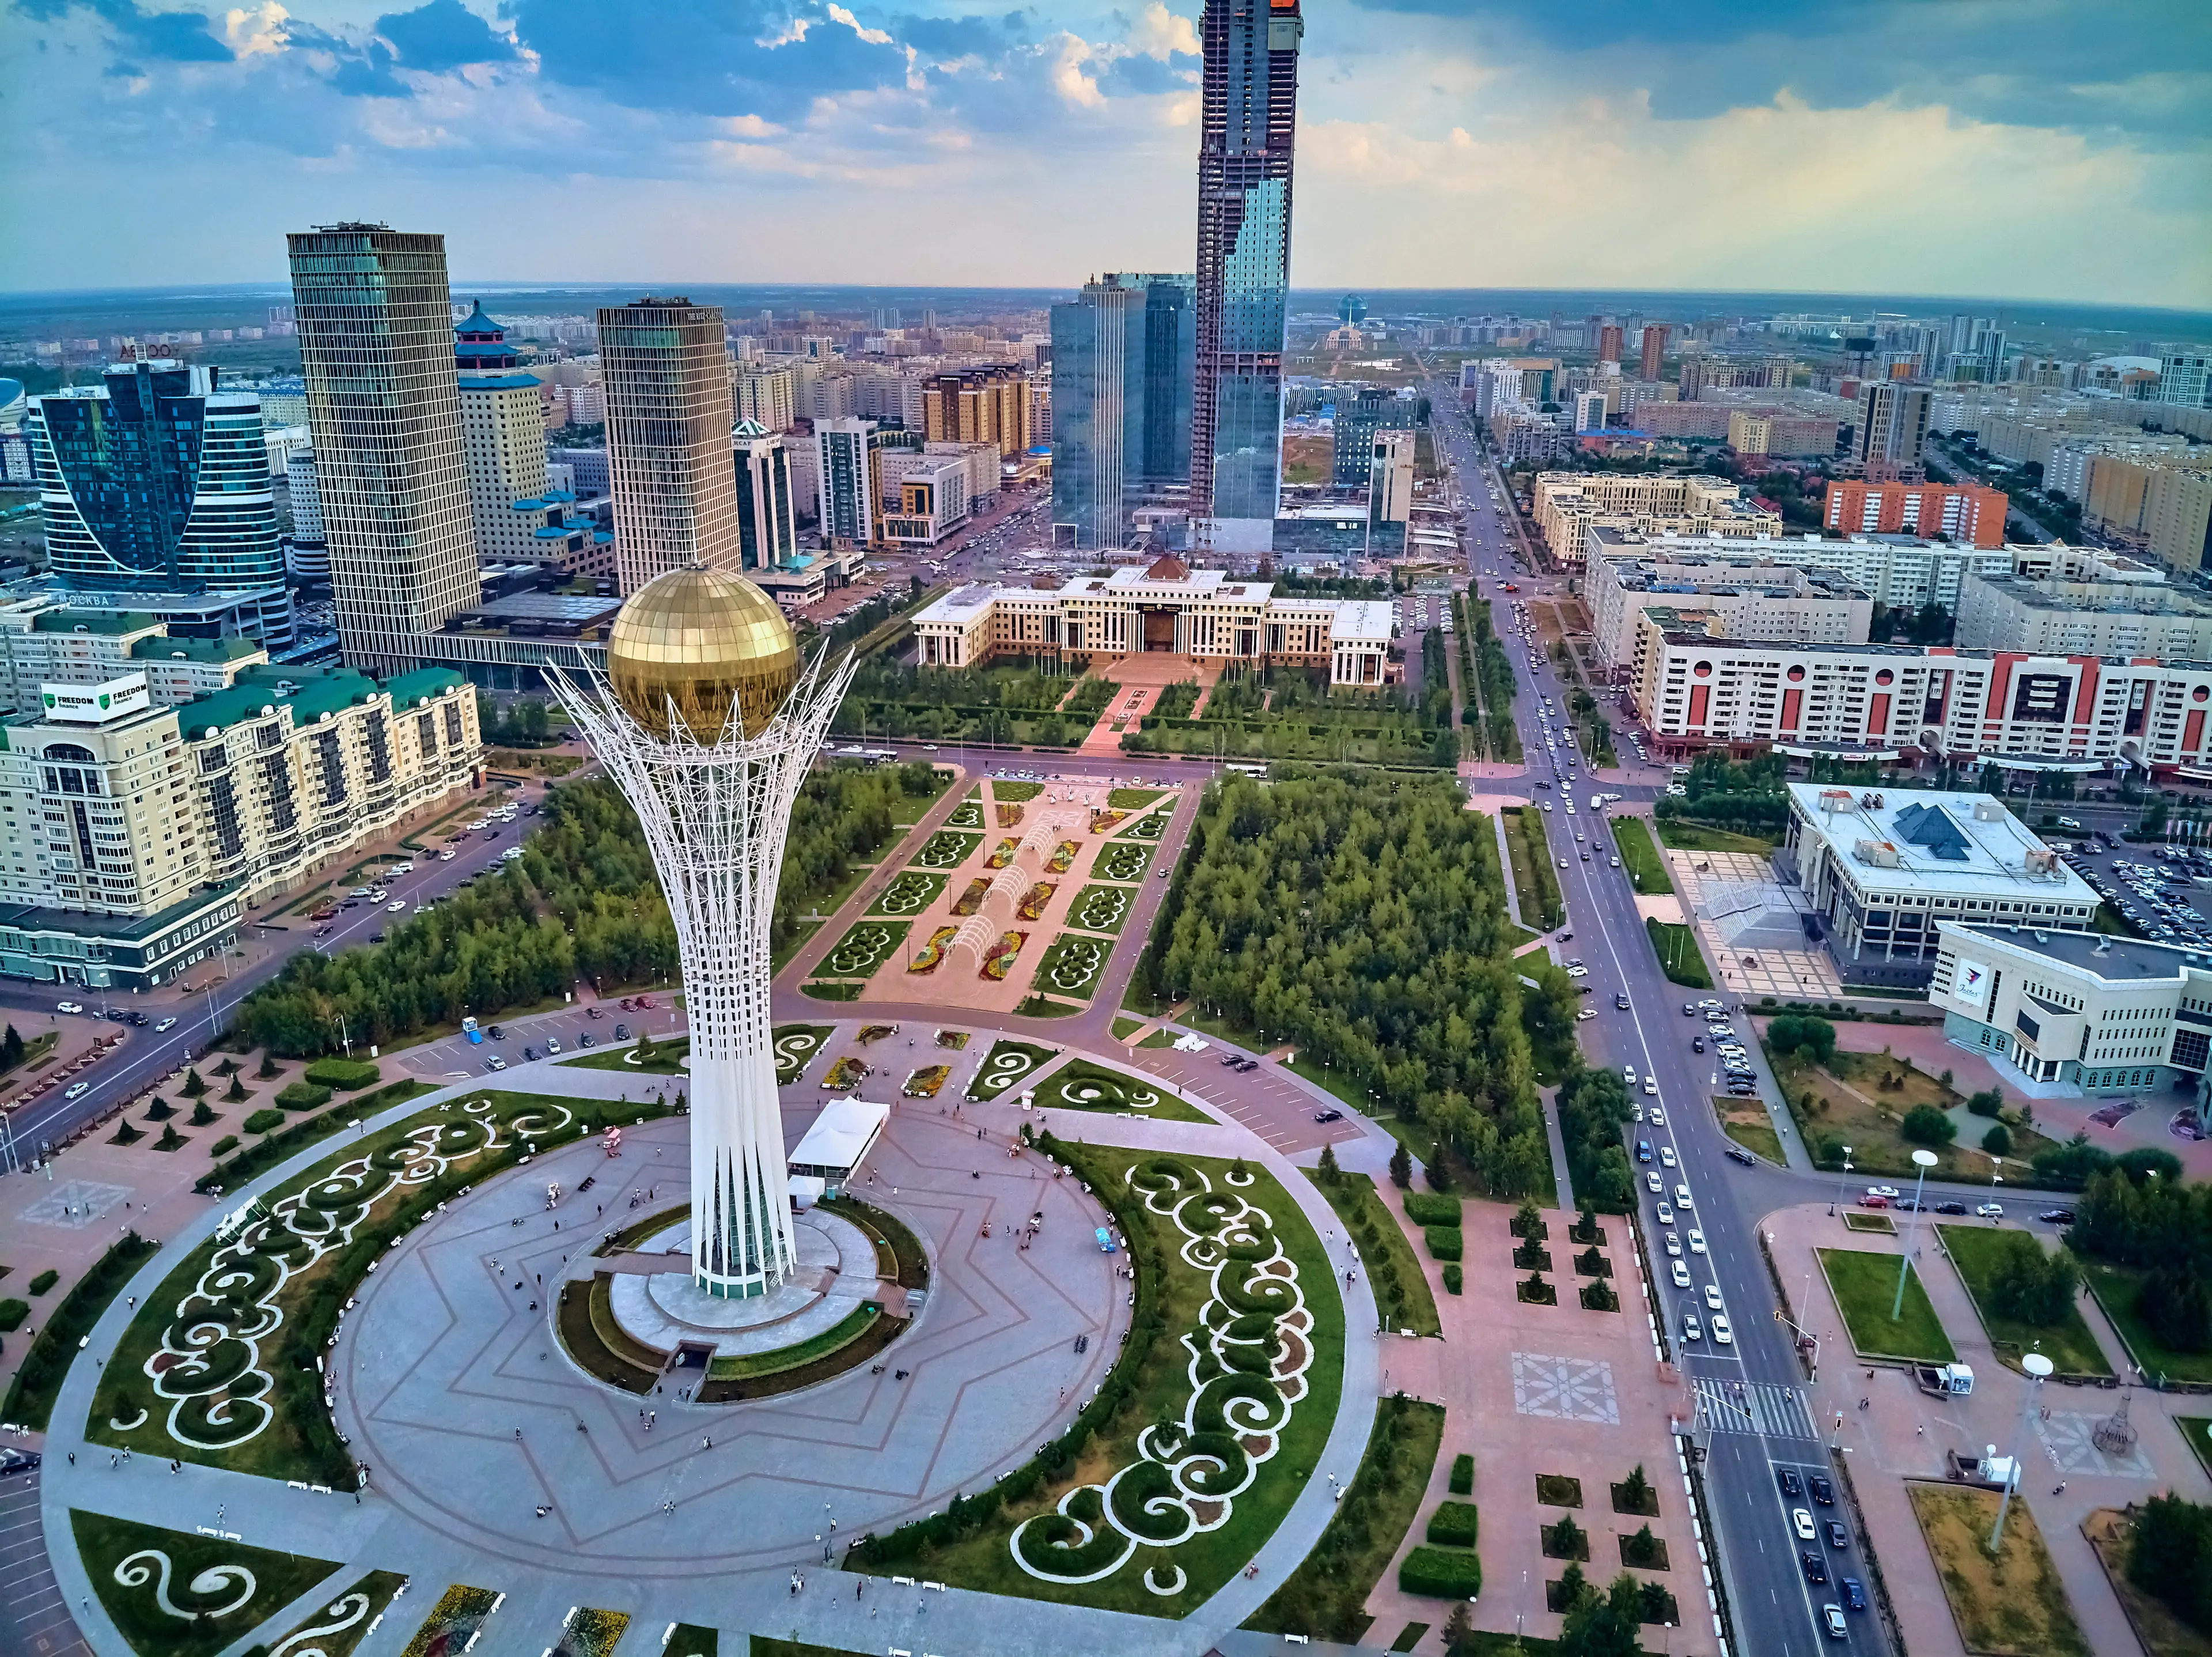 City center with skyscrapers and Baiterek Tower, symbol of Kazakh people